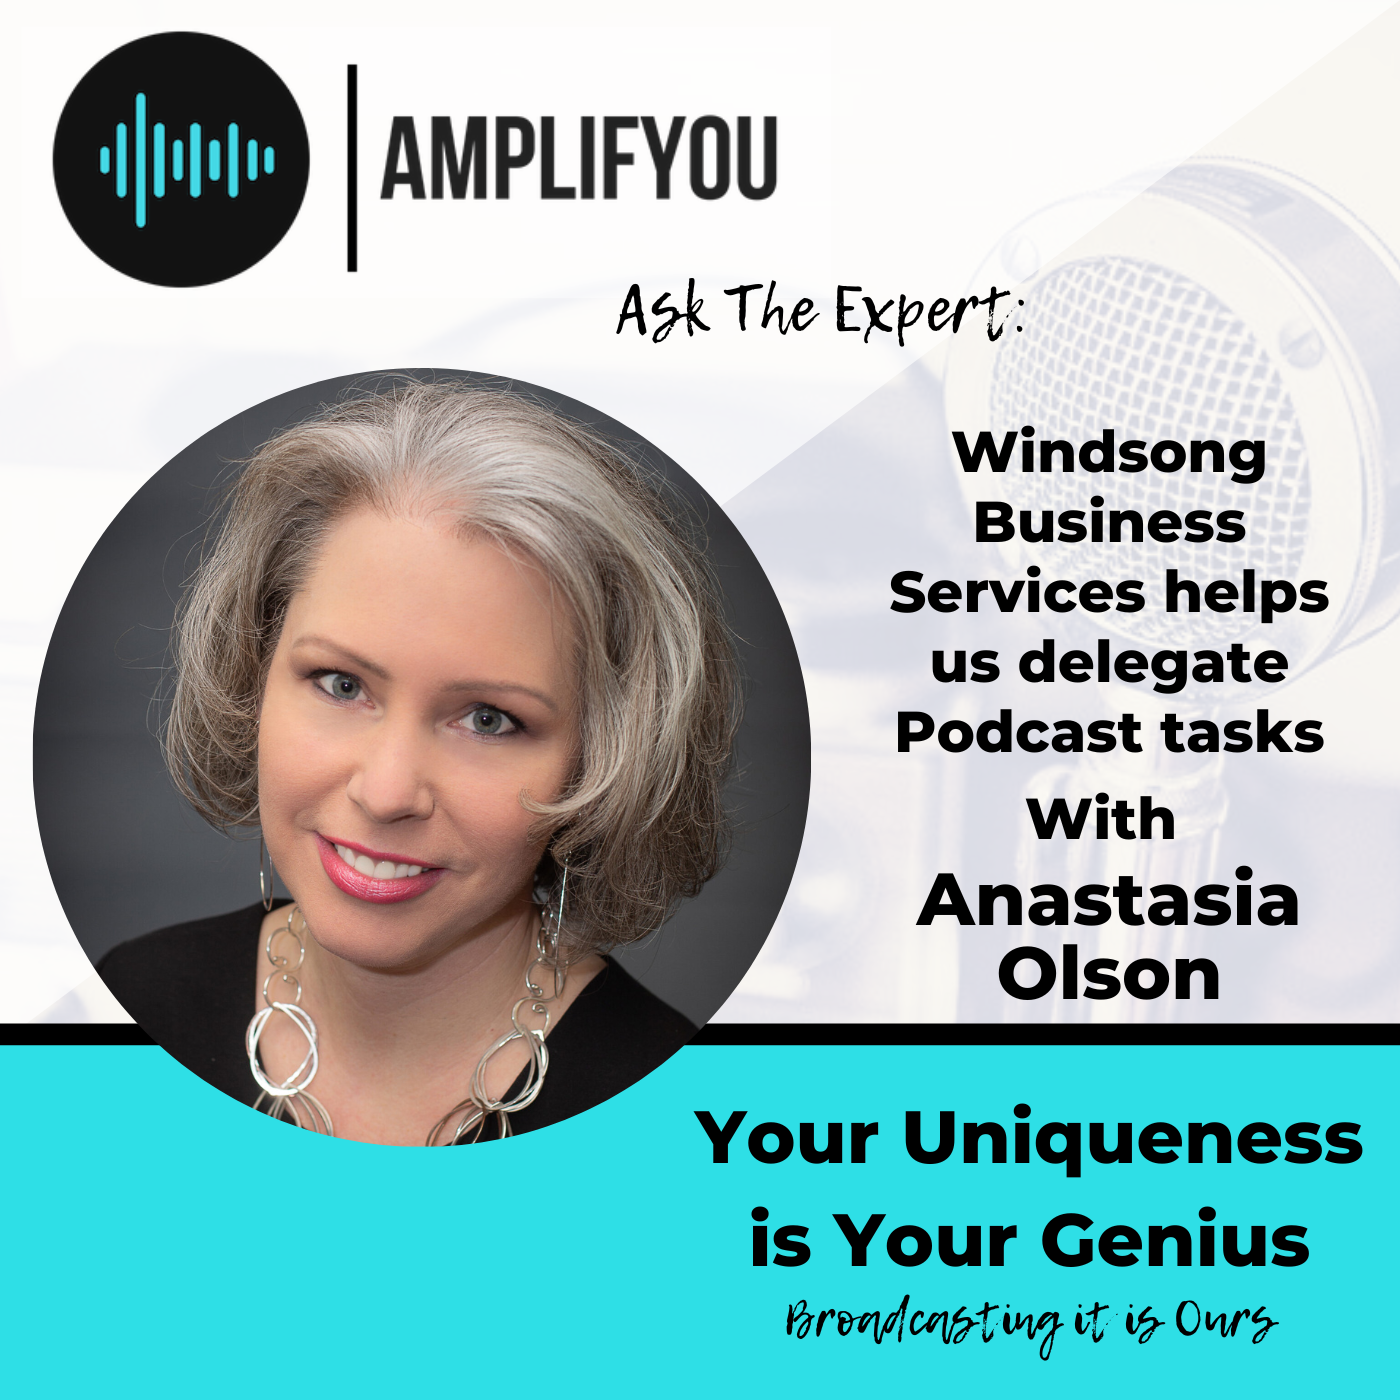 Ask the Expert: Anastasia Olson Windsong Business Services helps us delegate Podcast tasks!